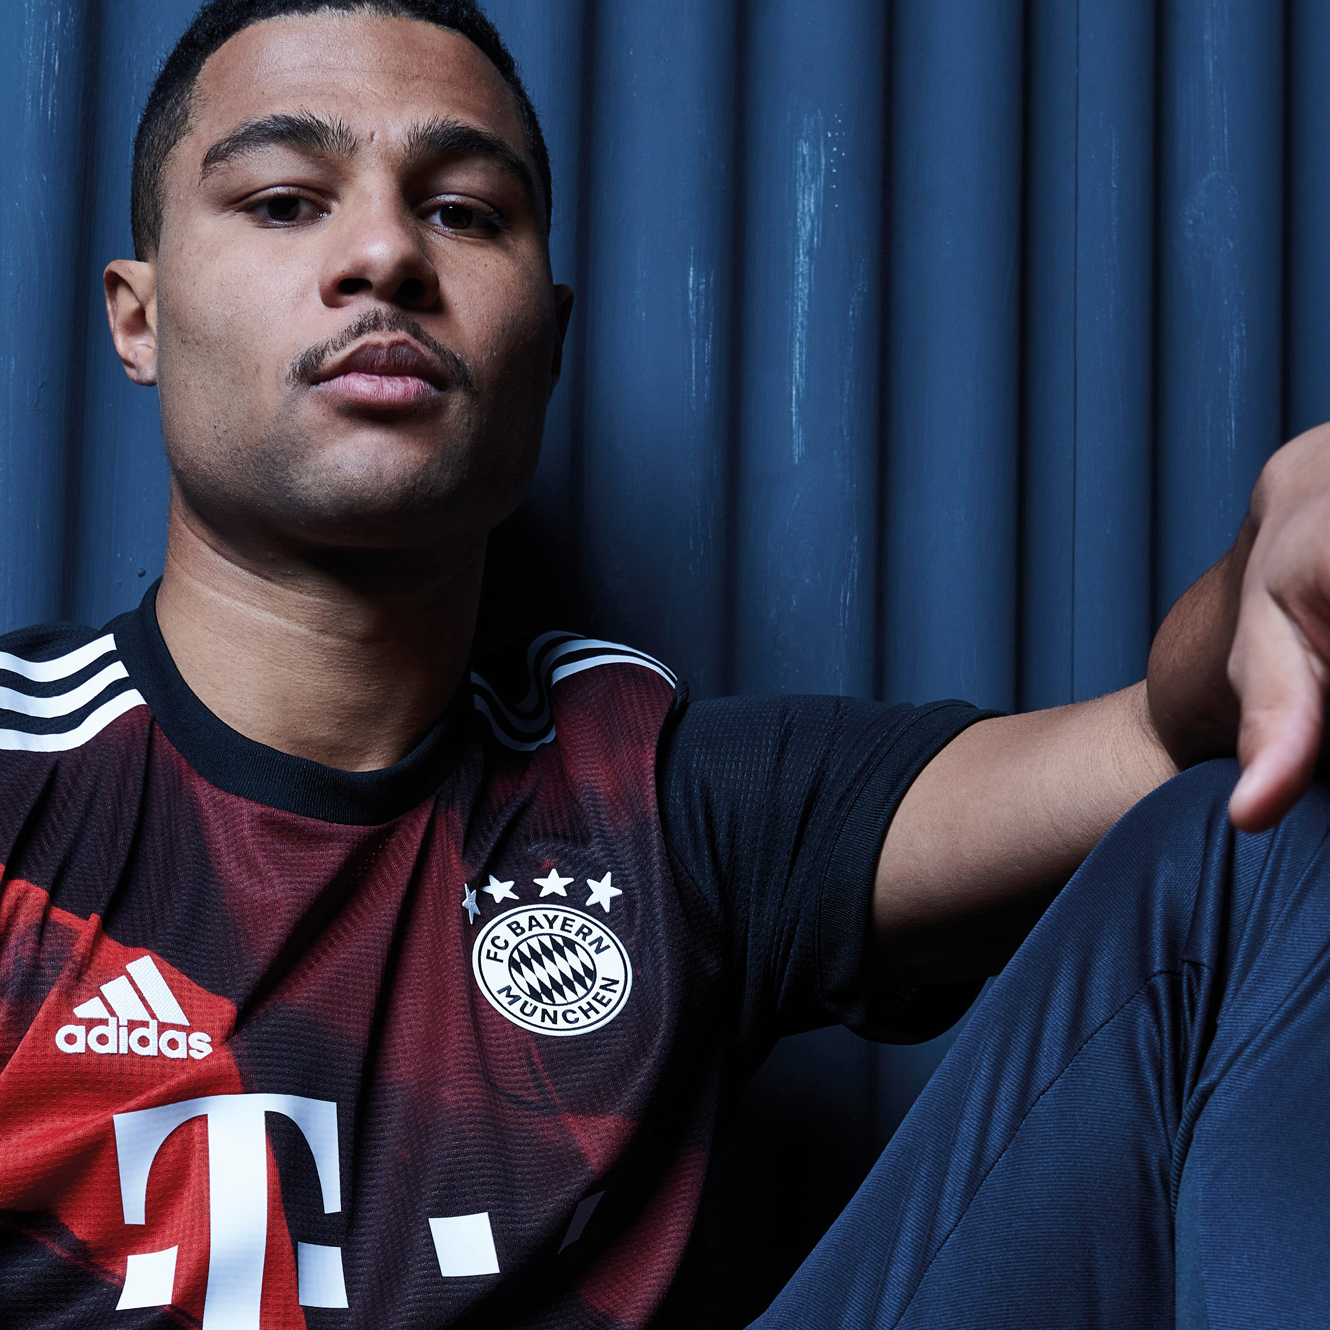 Bayern Munich has unveiled their new adidas away shirt for the